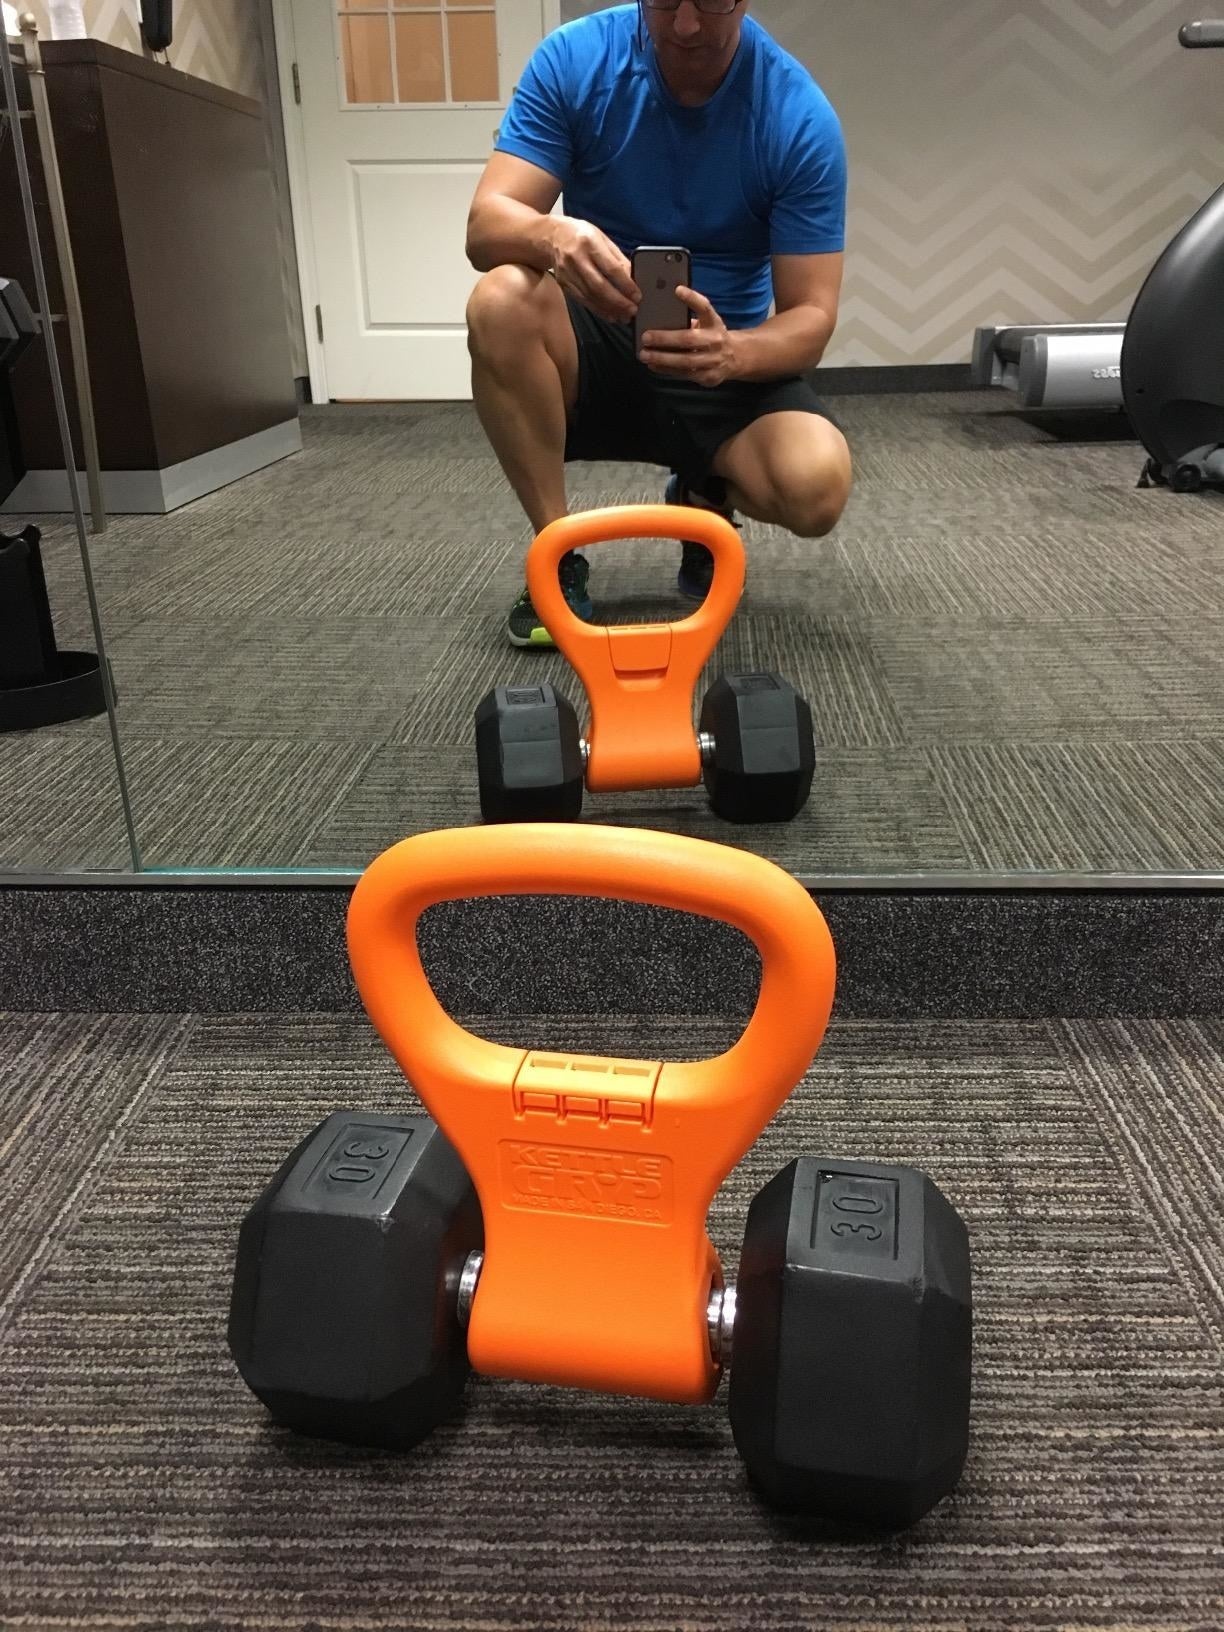 This Unique Workout Finds New Uses for Common Gym Equipment